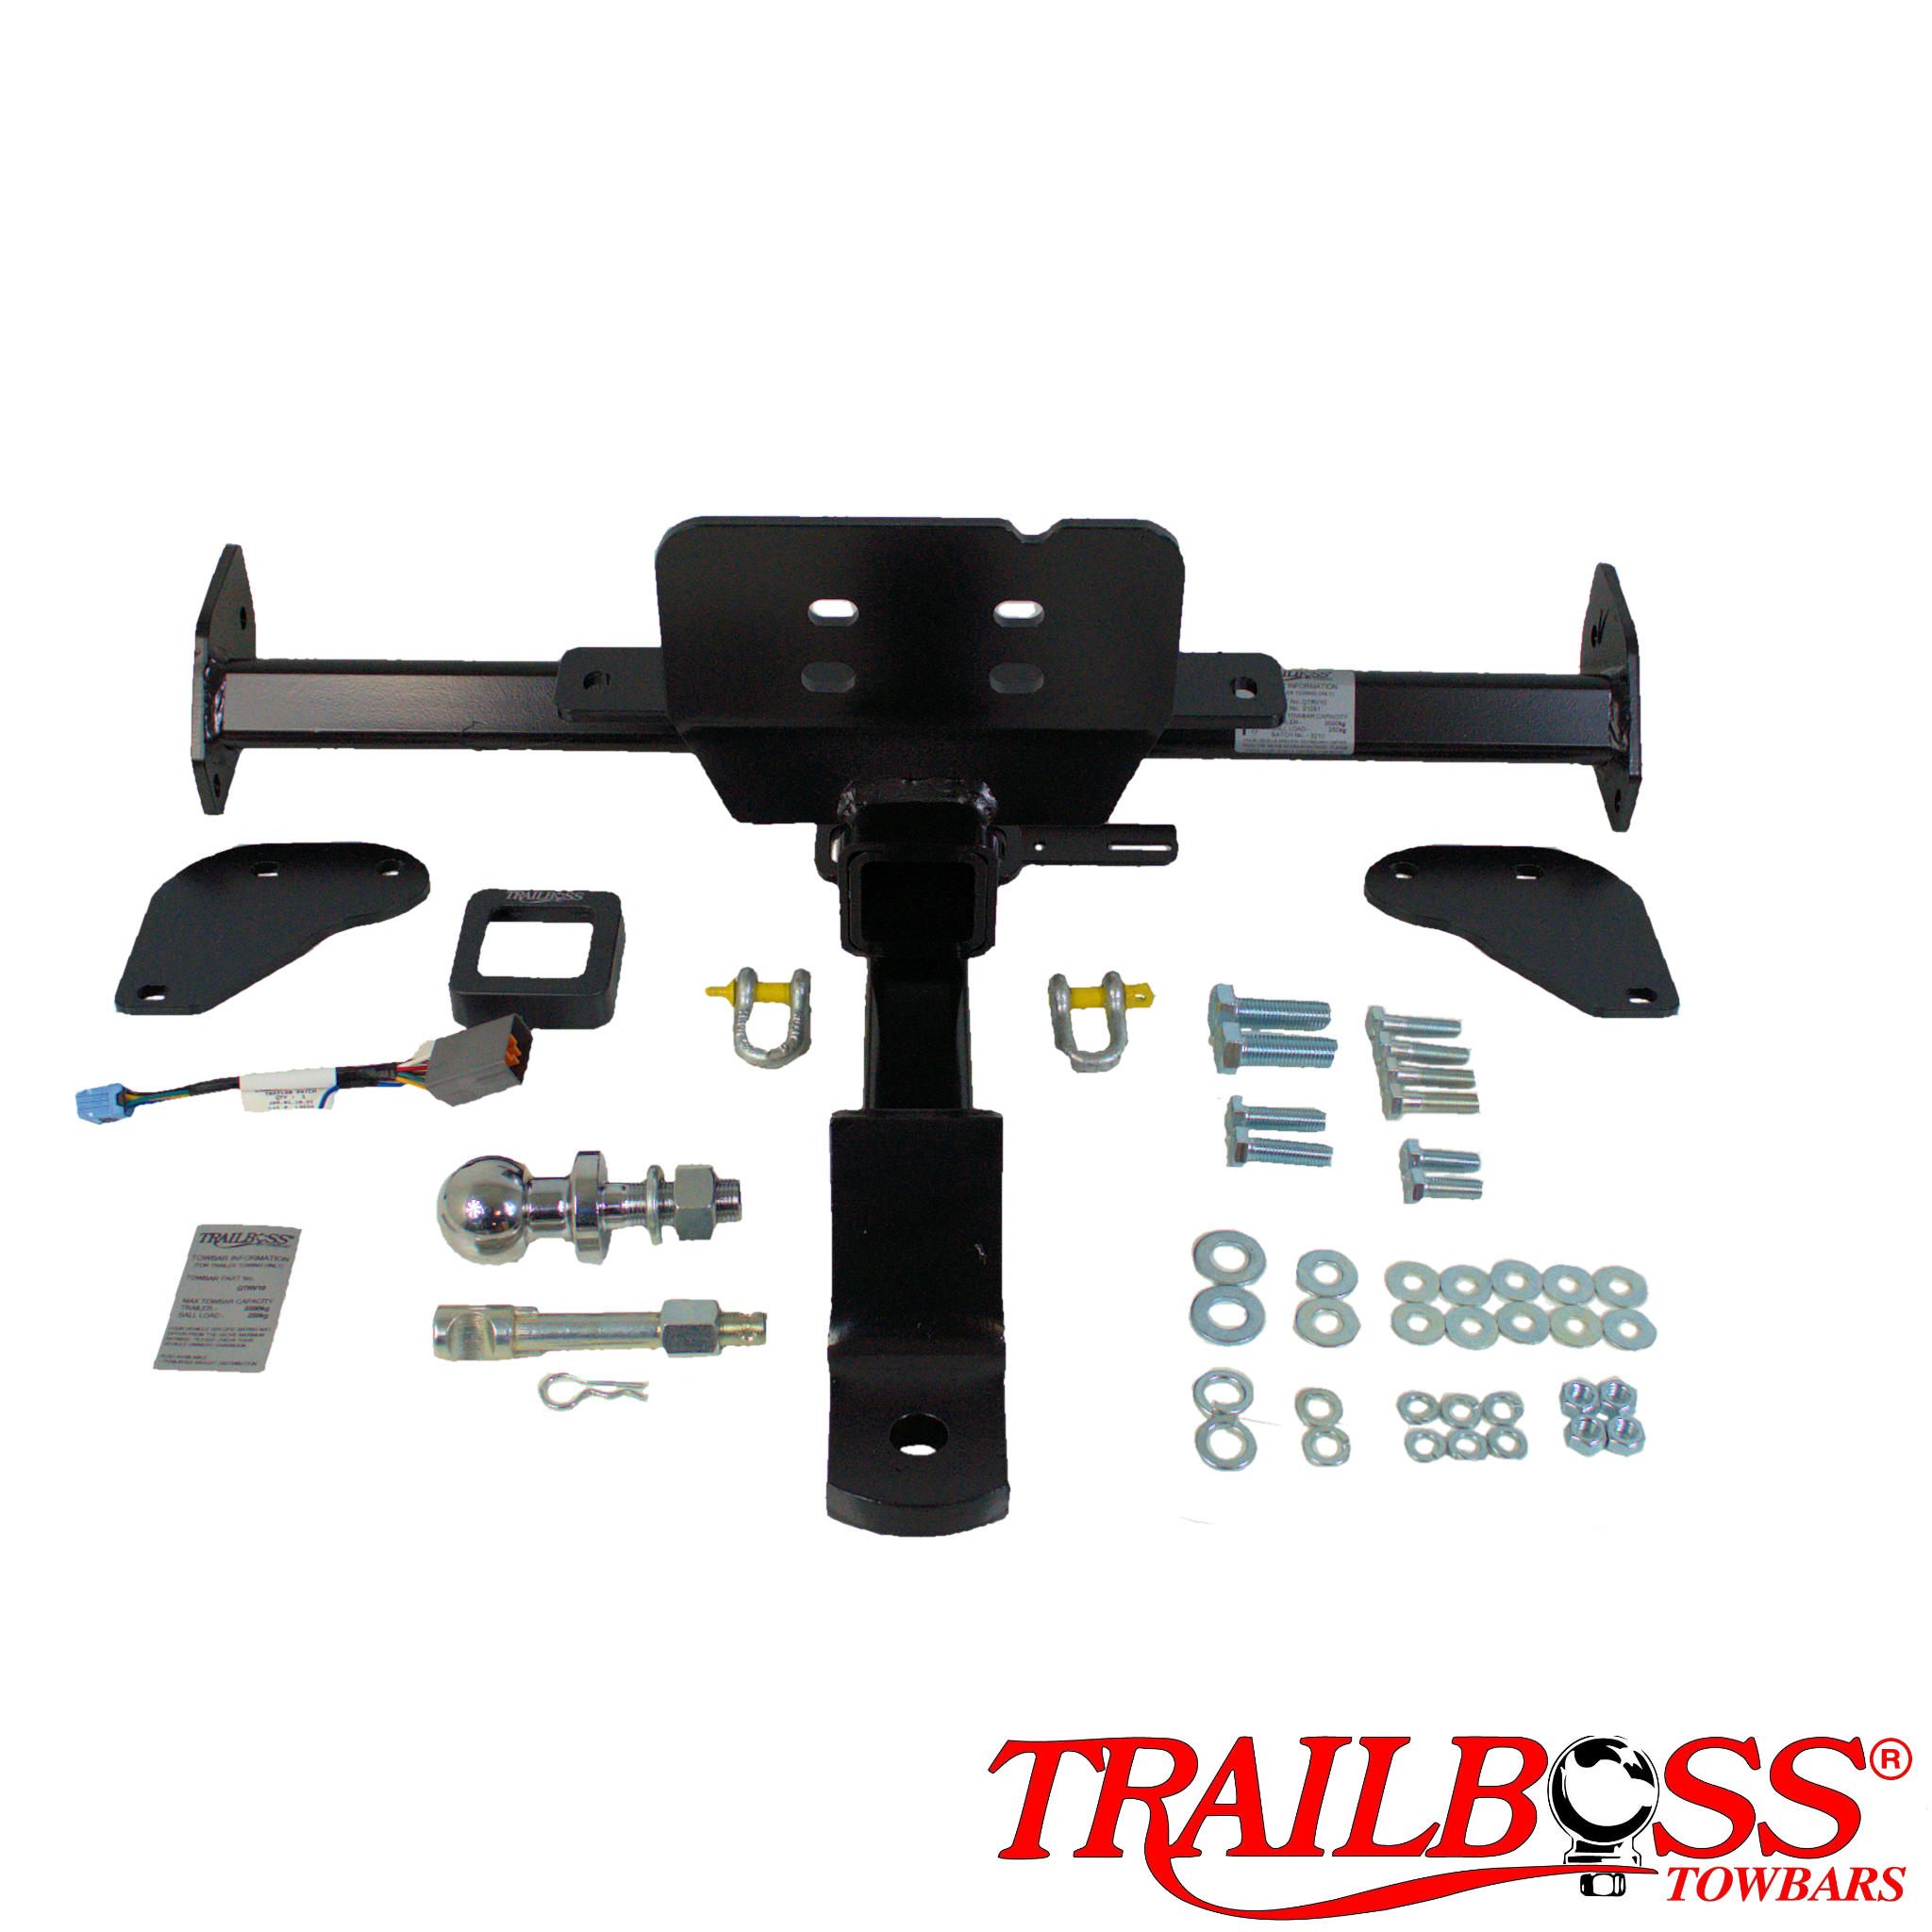 Land Rover Defender 90 SUV 09/2010 - 06/2020 (Fits with original step) - Towbar Kit - HEAVY DUTY PREMIUM